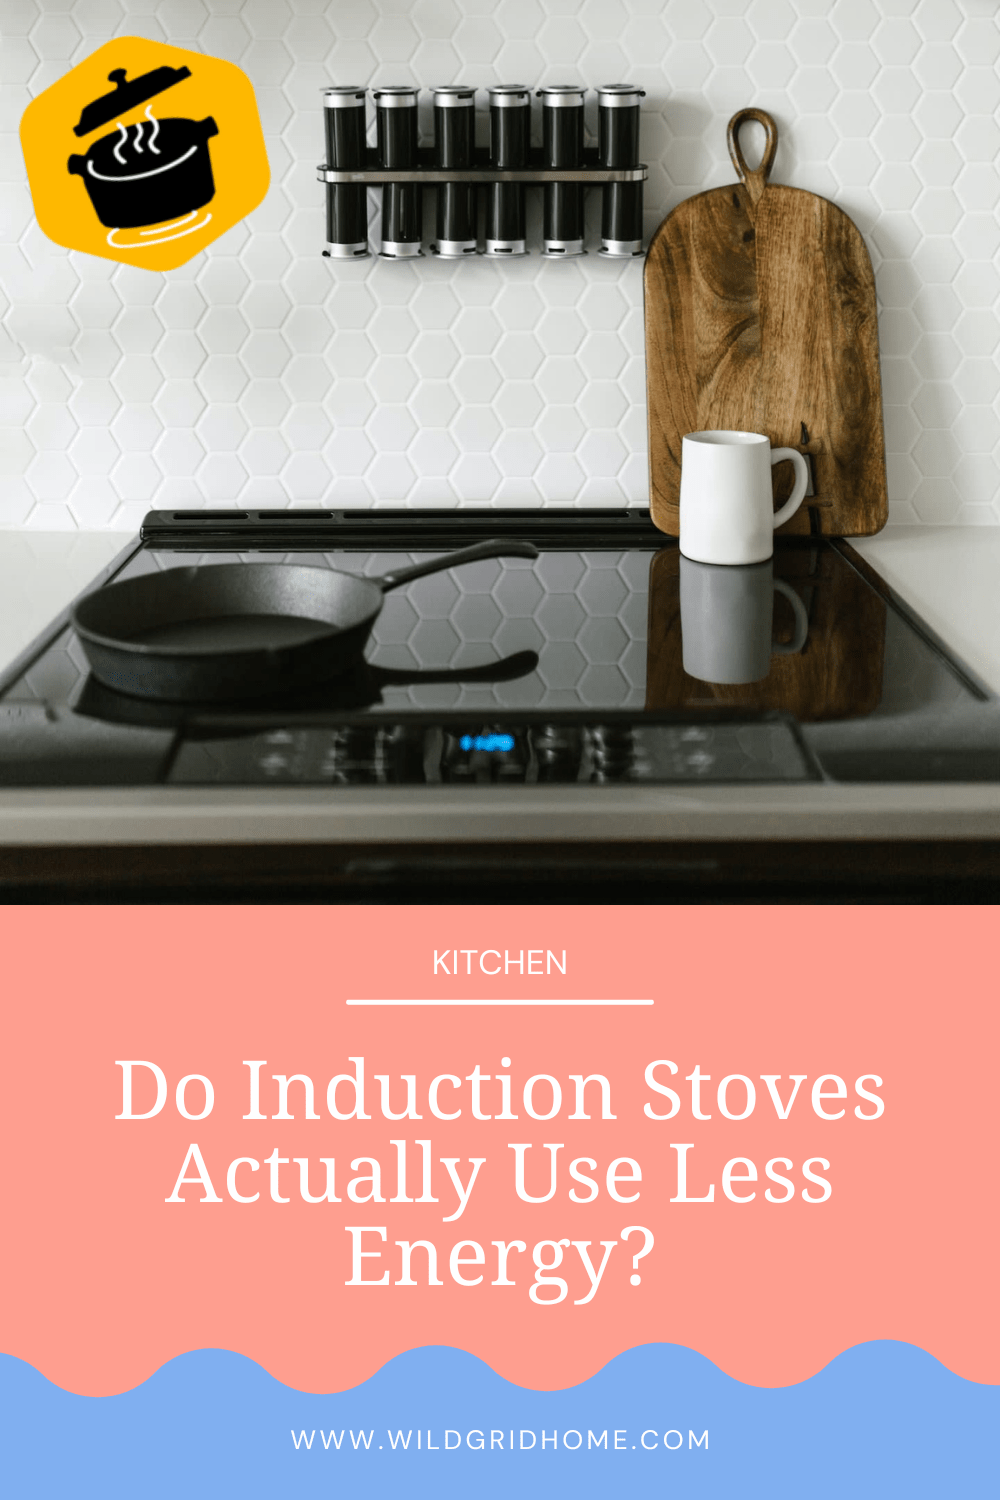 Do induction stoves actually use less energy? - Wildgrid Home